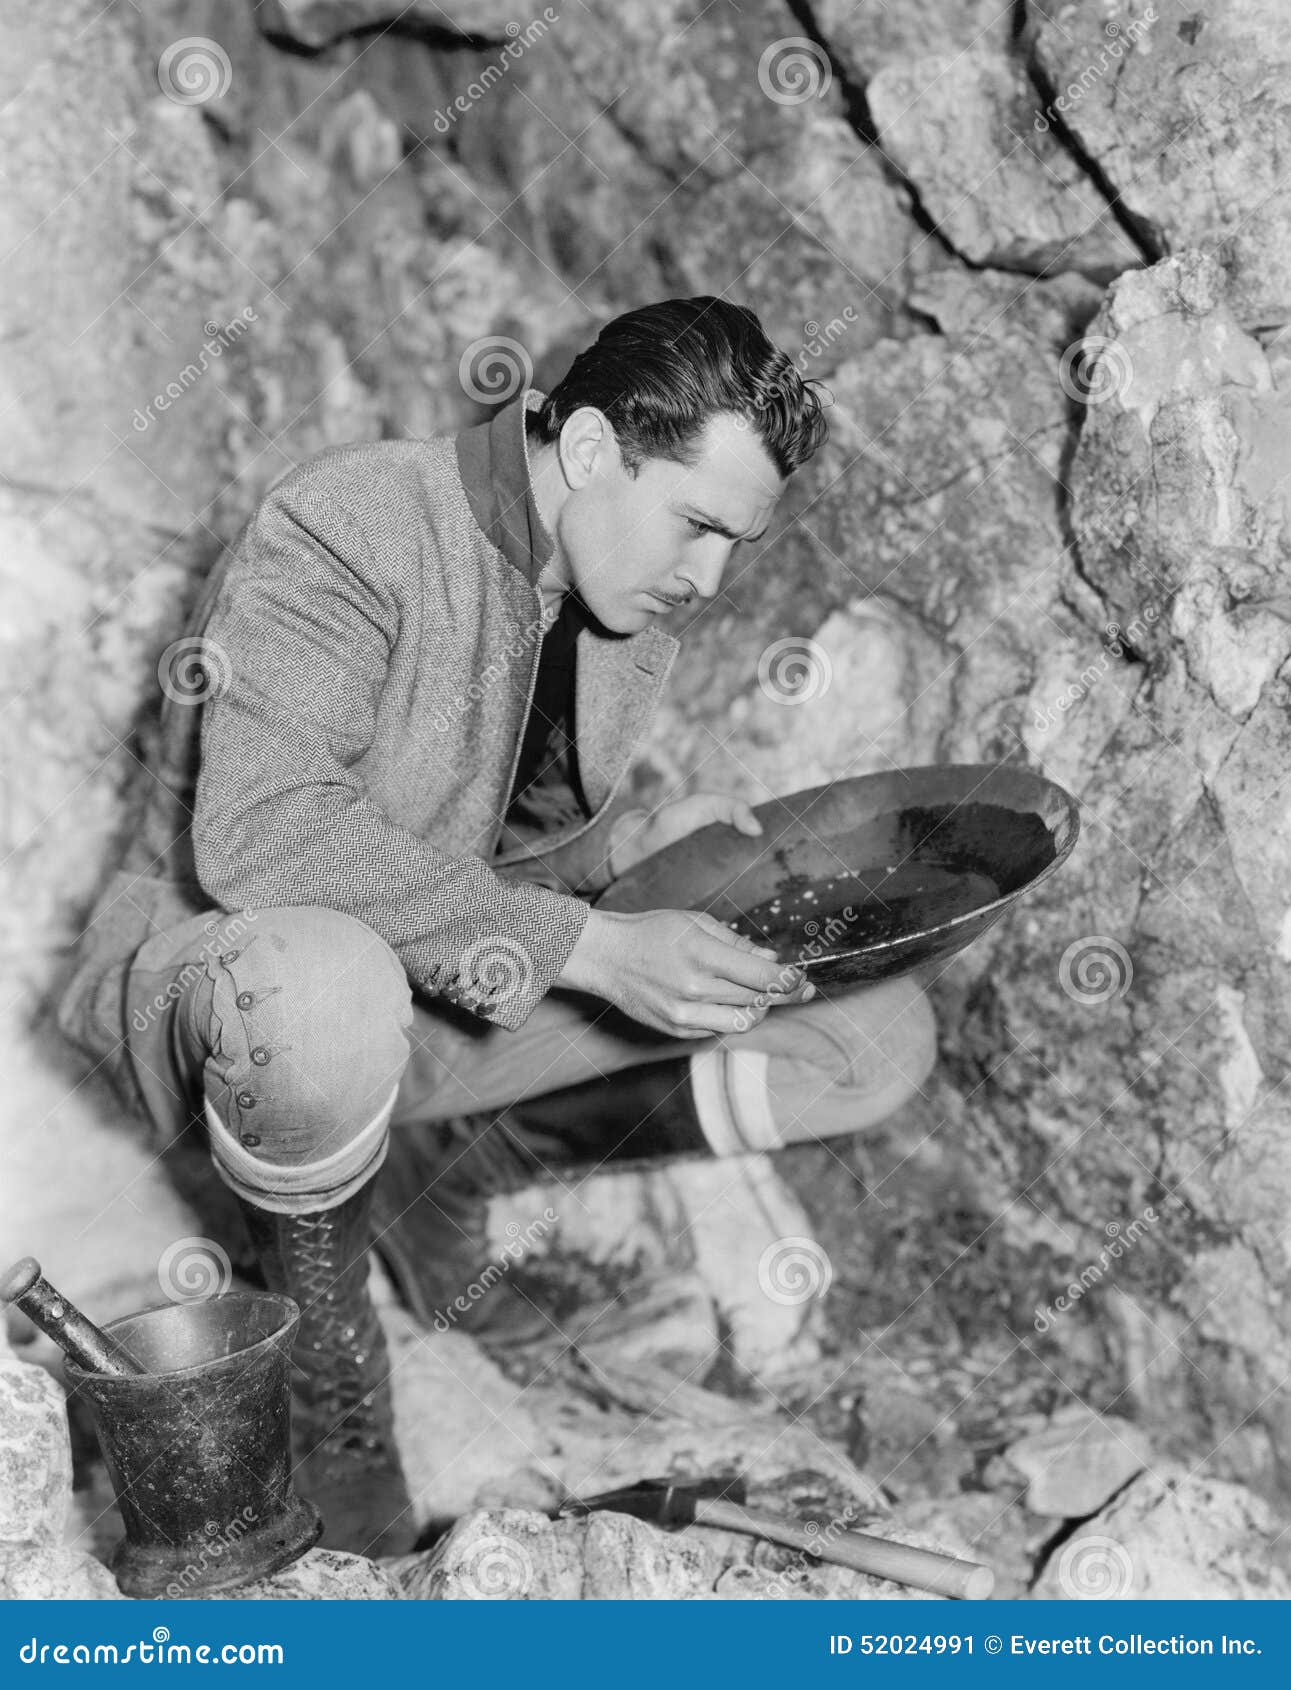 man crouching and panning for gold